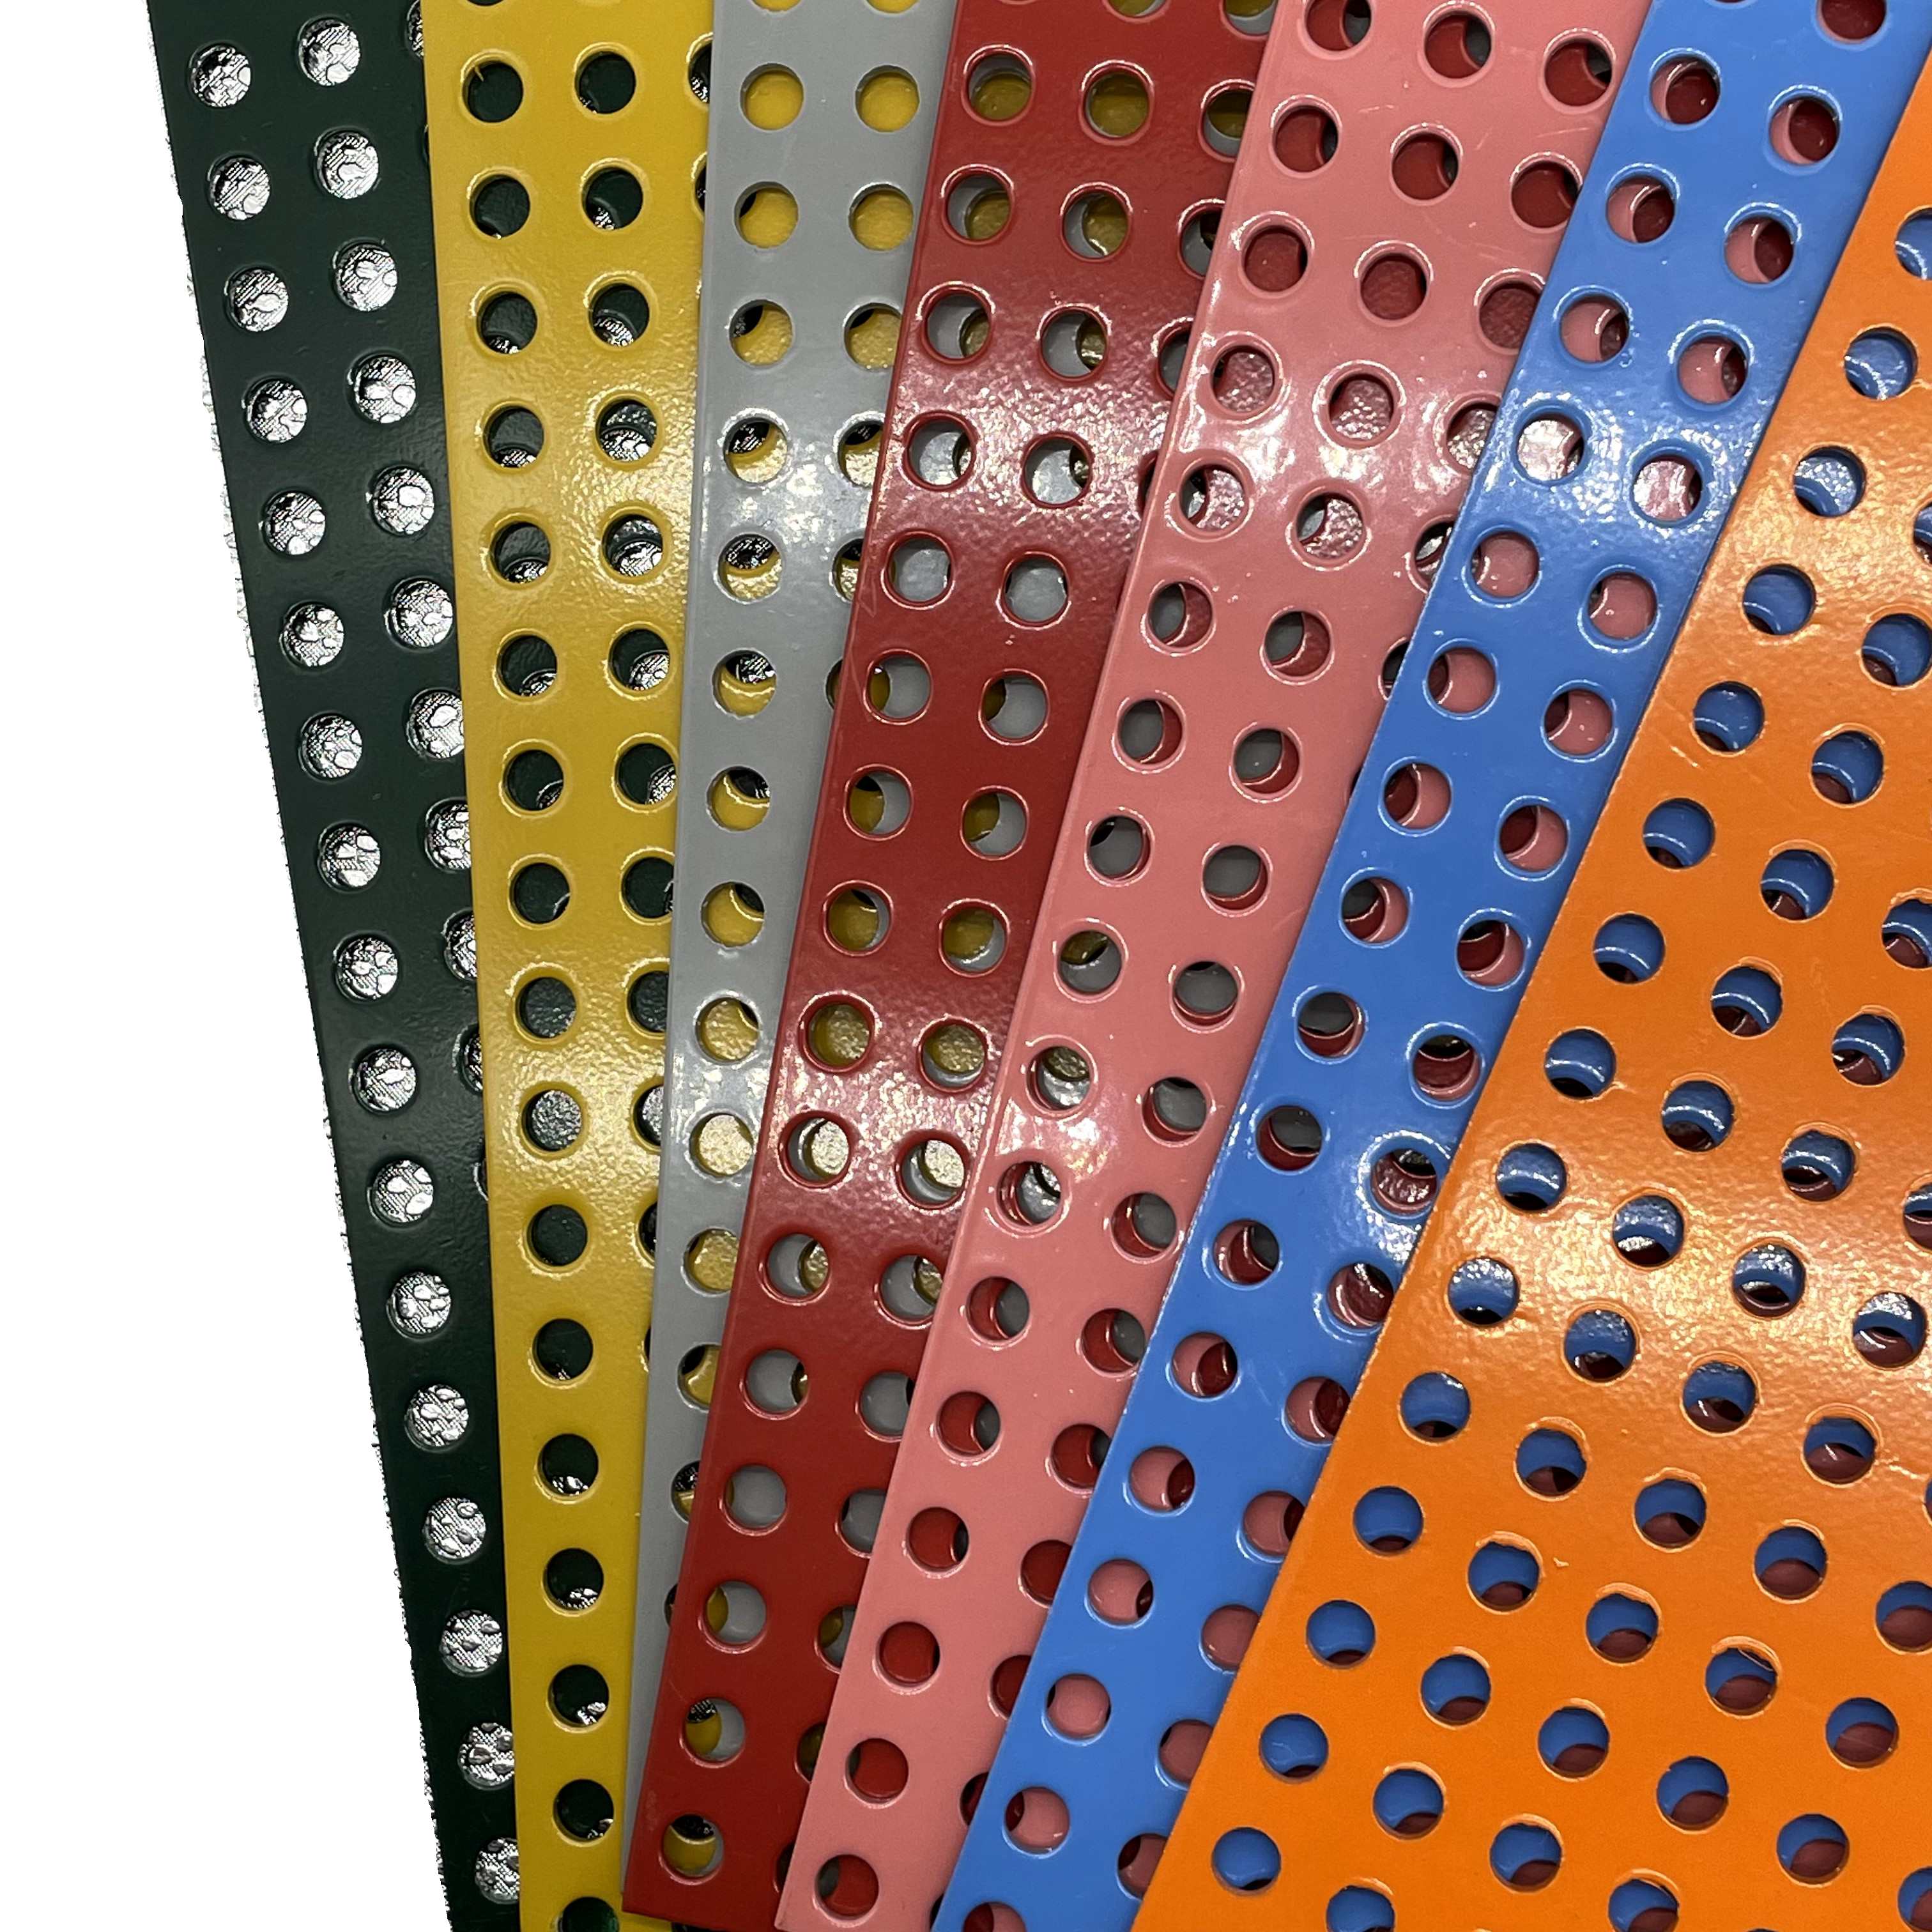 The production process of perforated metal mesh